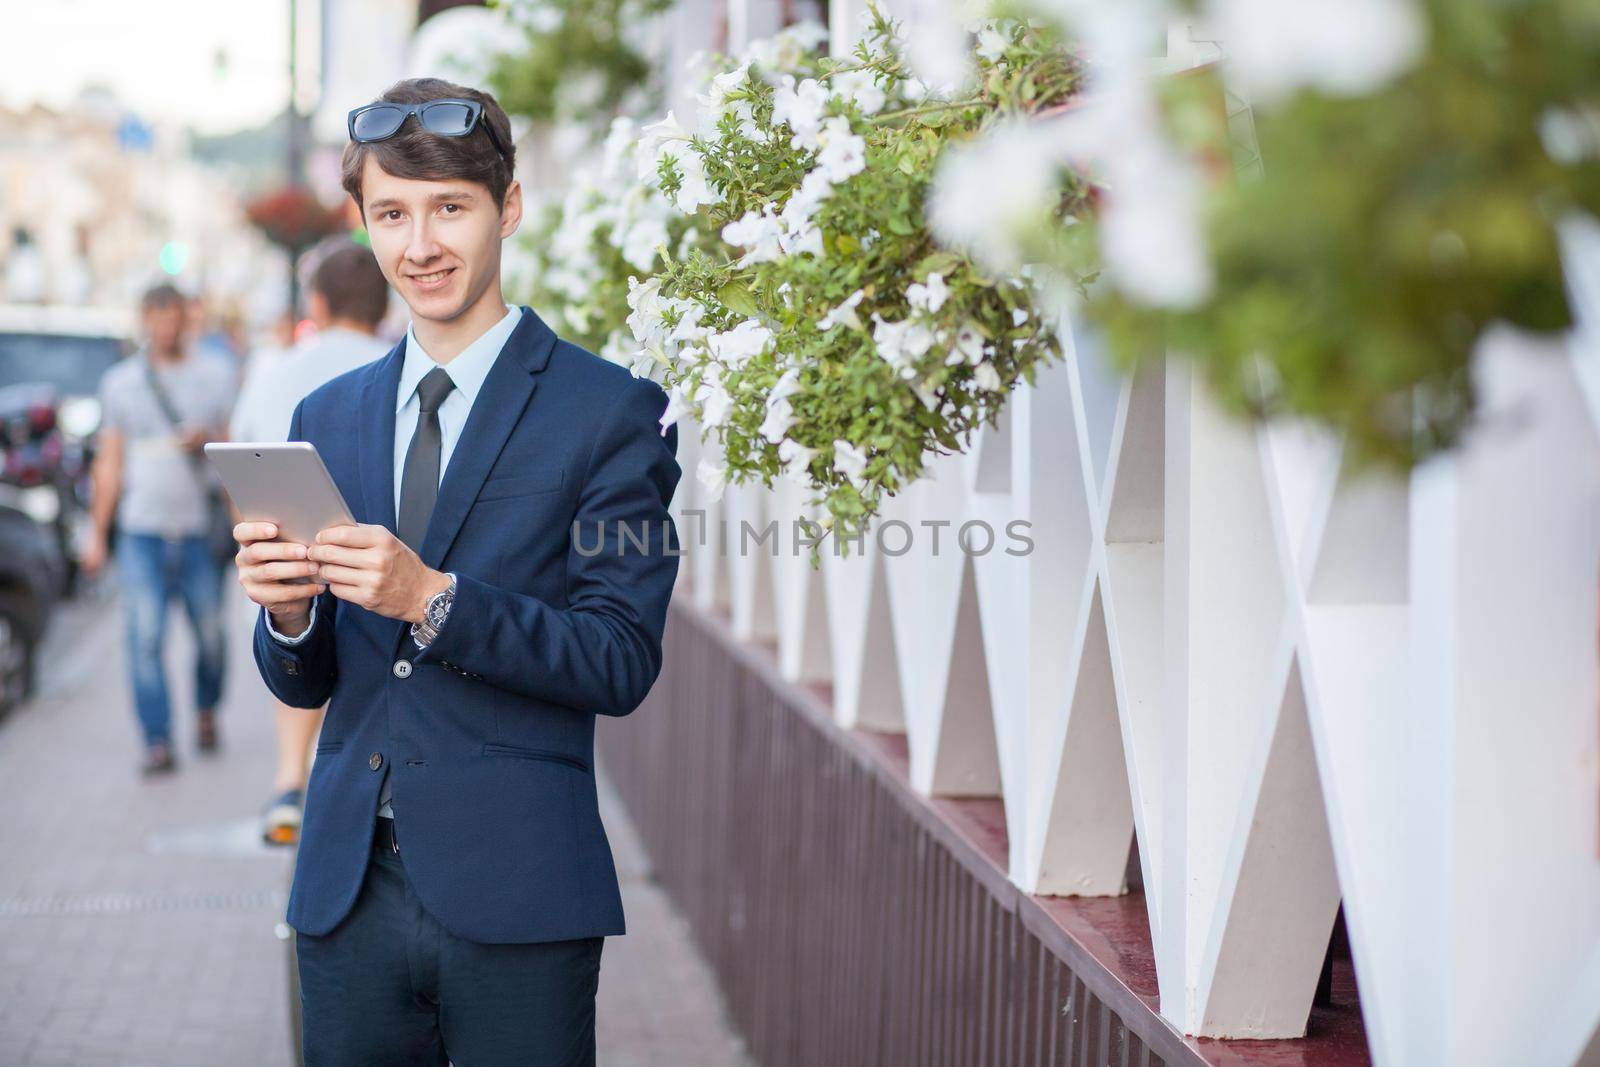 young man in business suit holding tablet on summertime day.